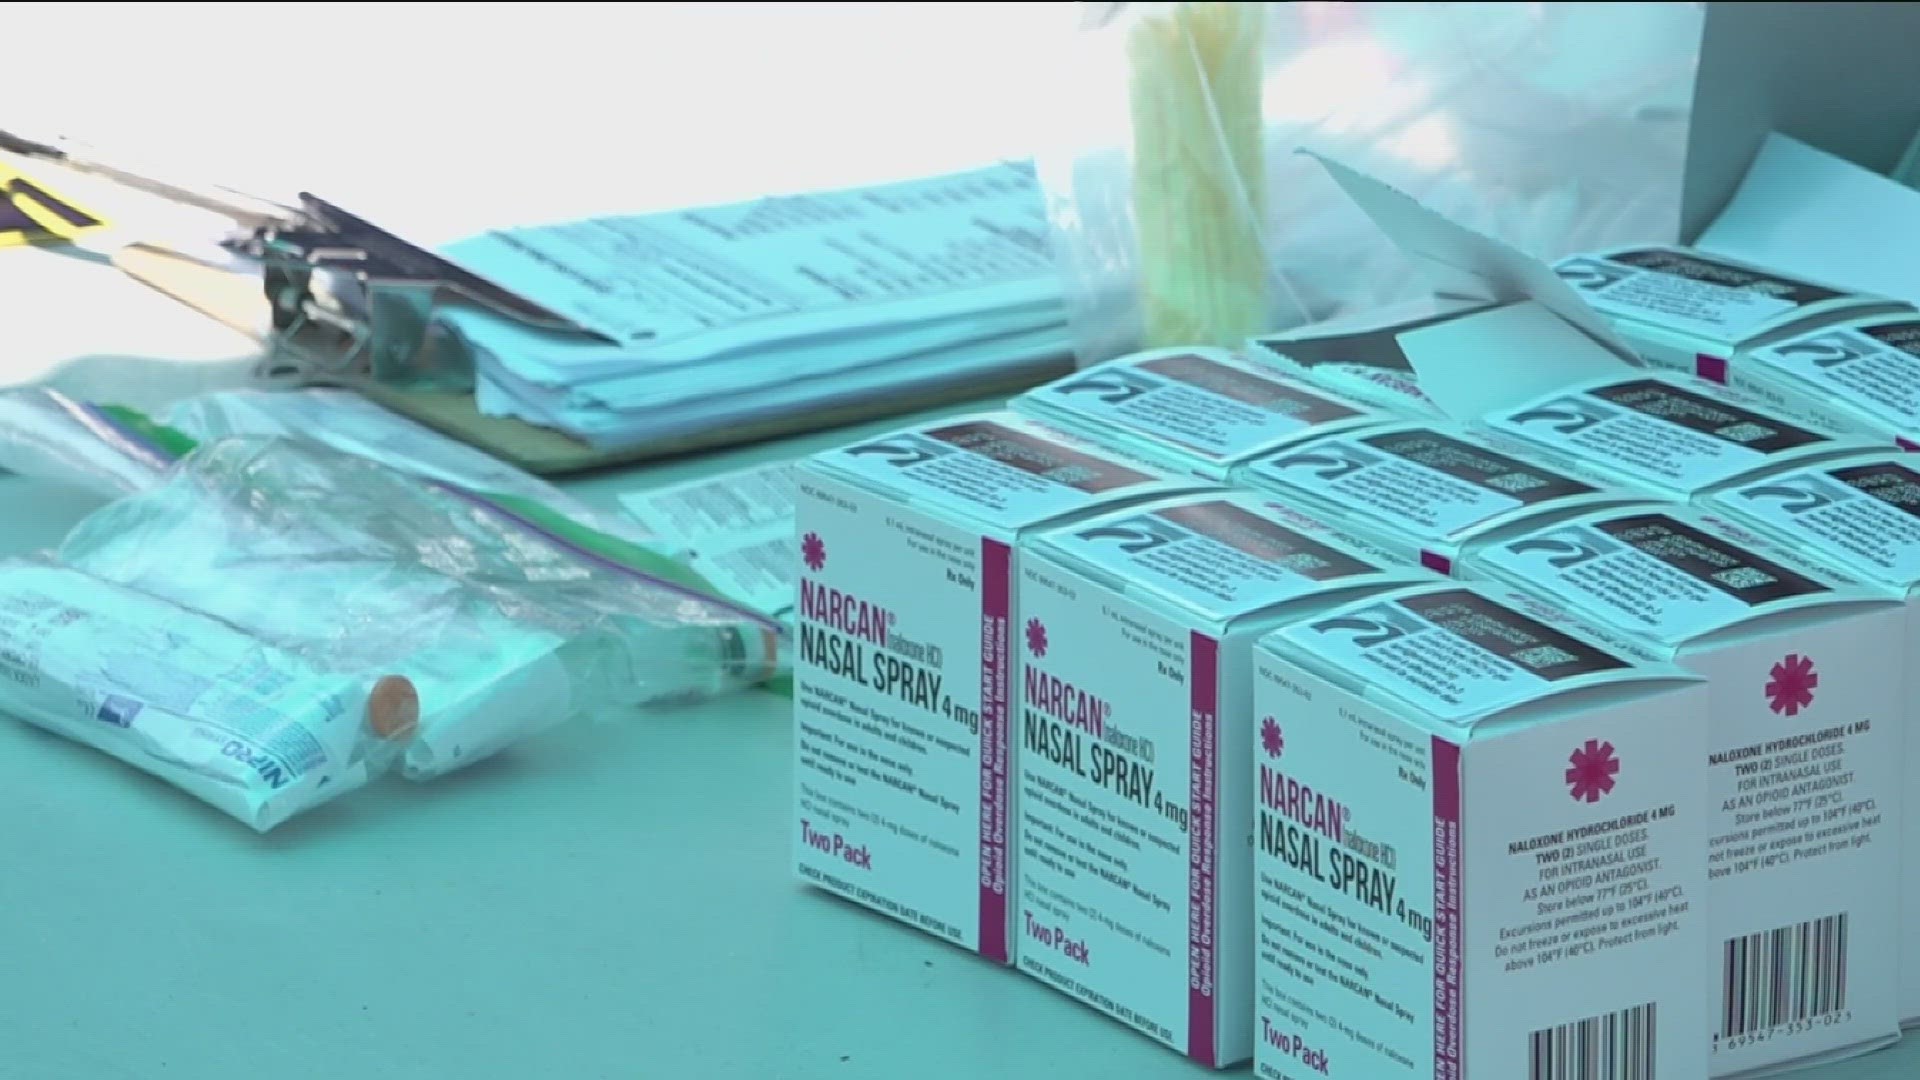 As fentanyl seizures and overdoses climb, one non-profit mission hopes education and prevention will make a difference.